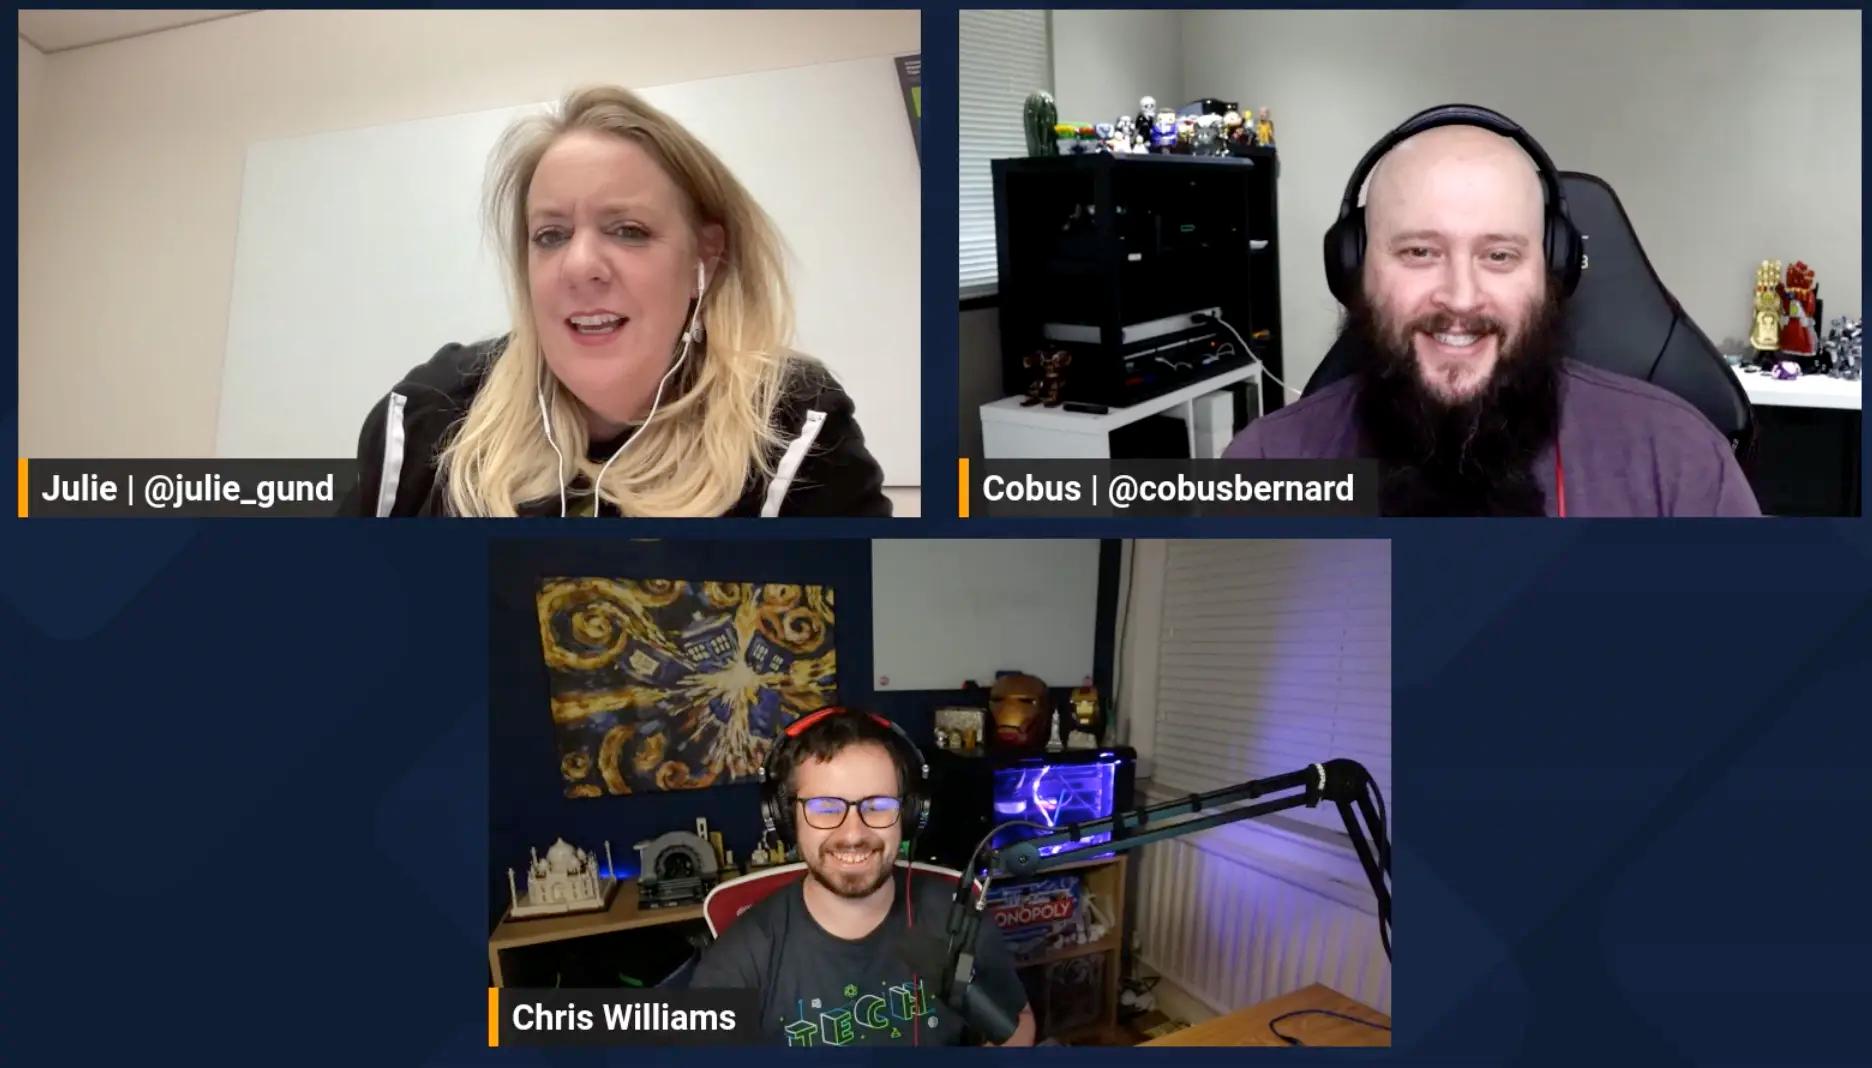 Streaming session with Julie, Chris, and Cobus all smiling